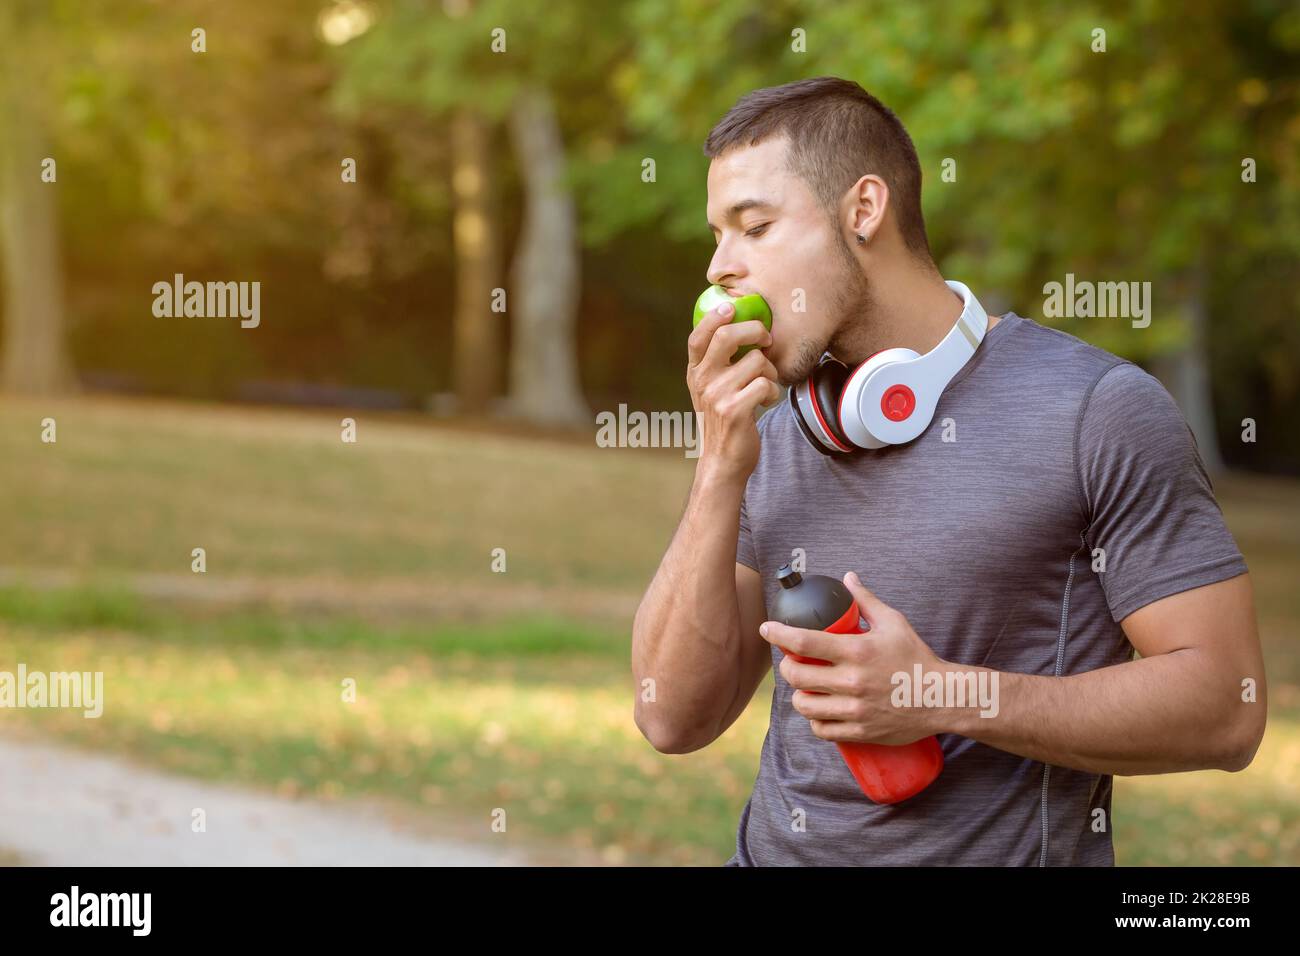 Runner young latin man eating an apple sports training fitness copyspace copy space Stock Photo